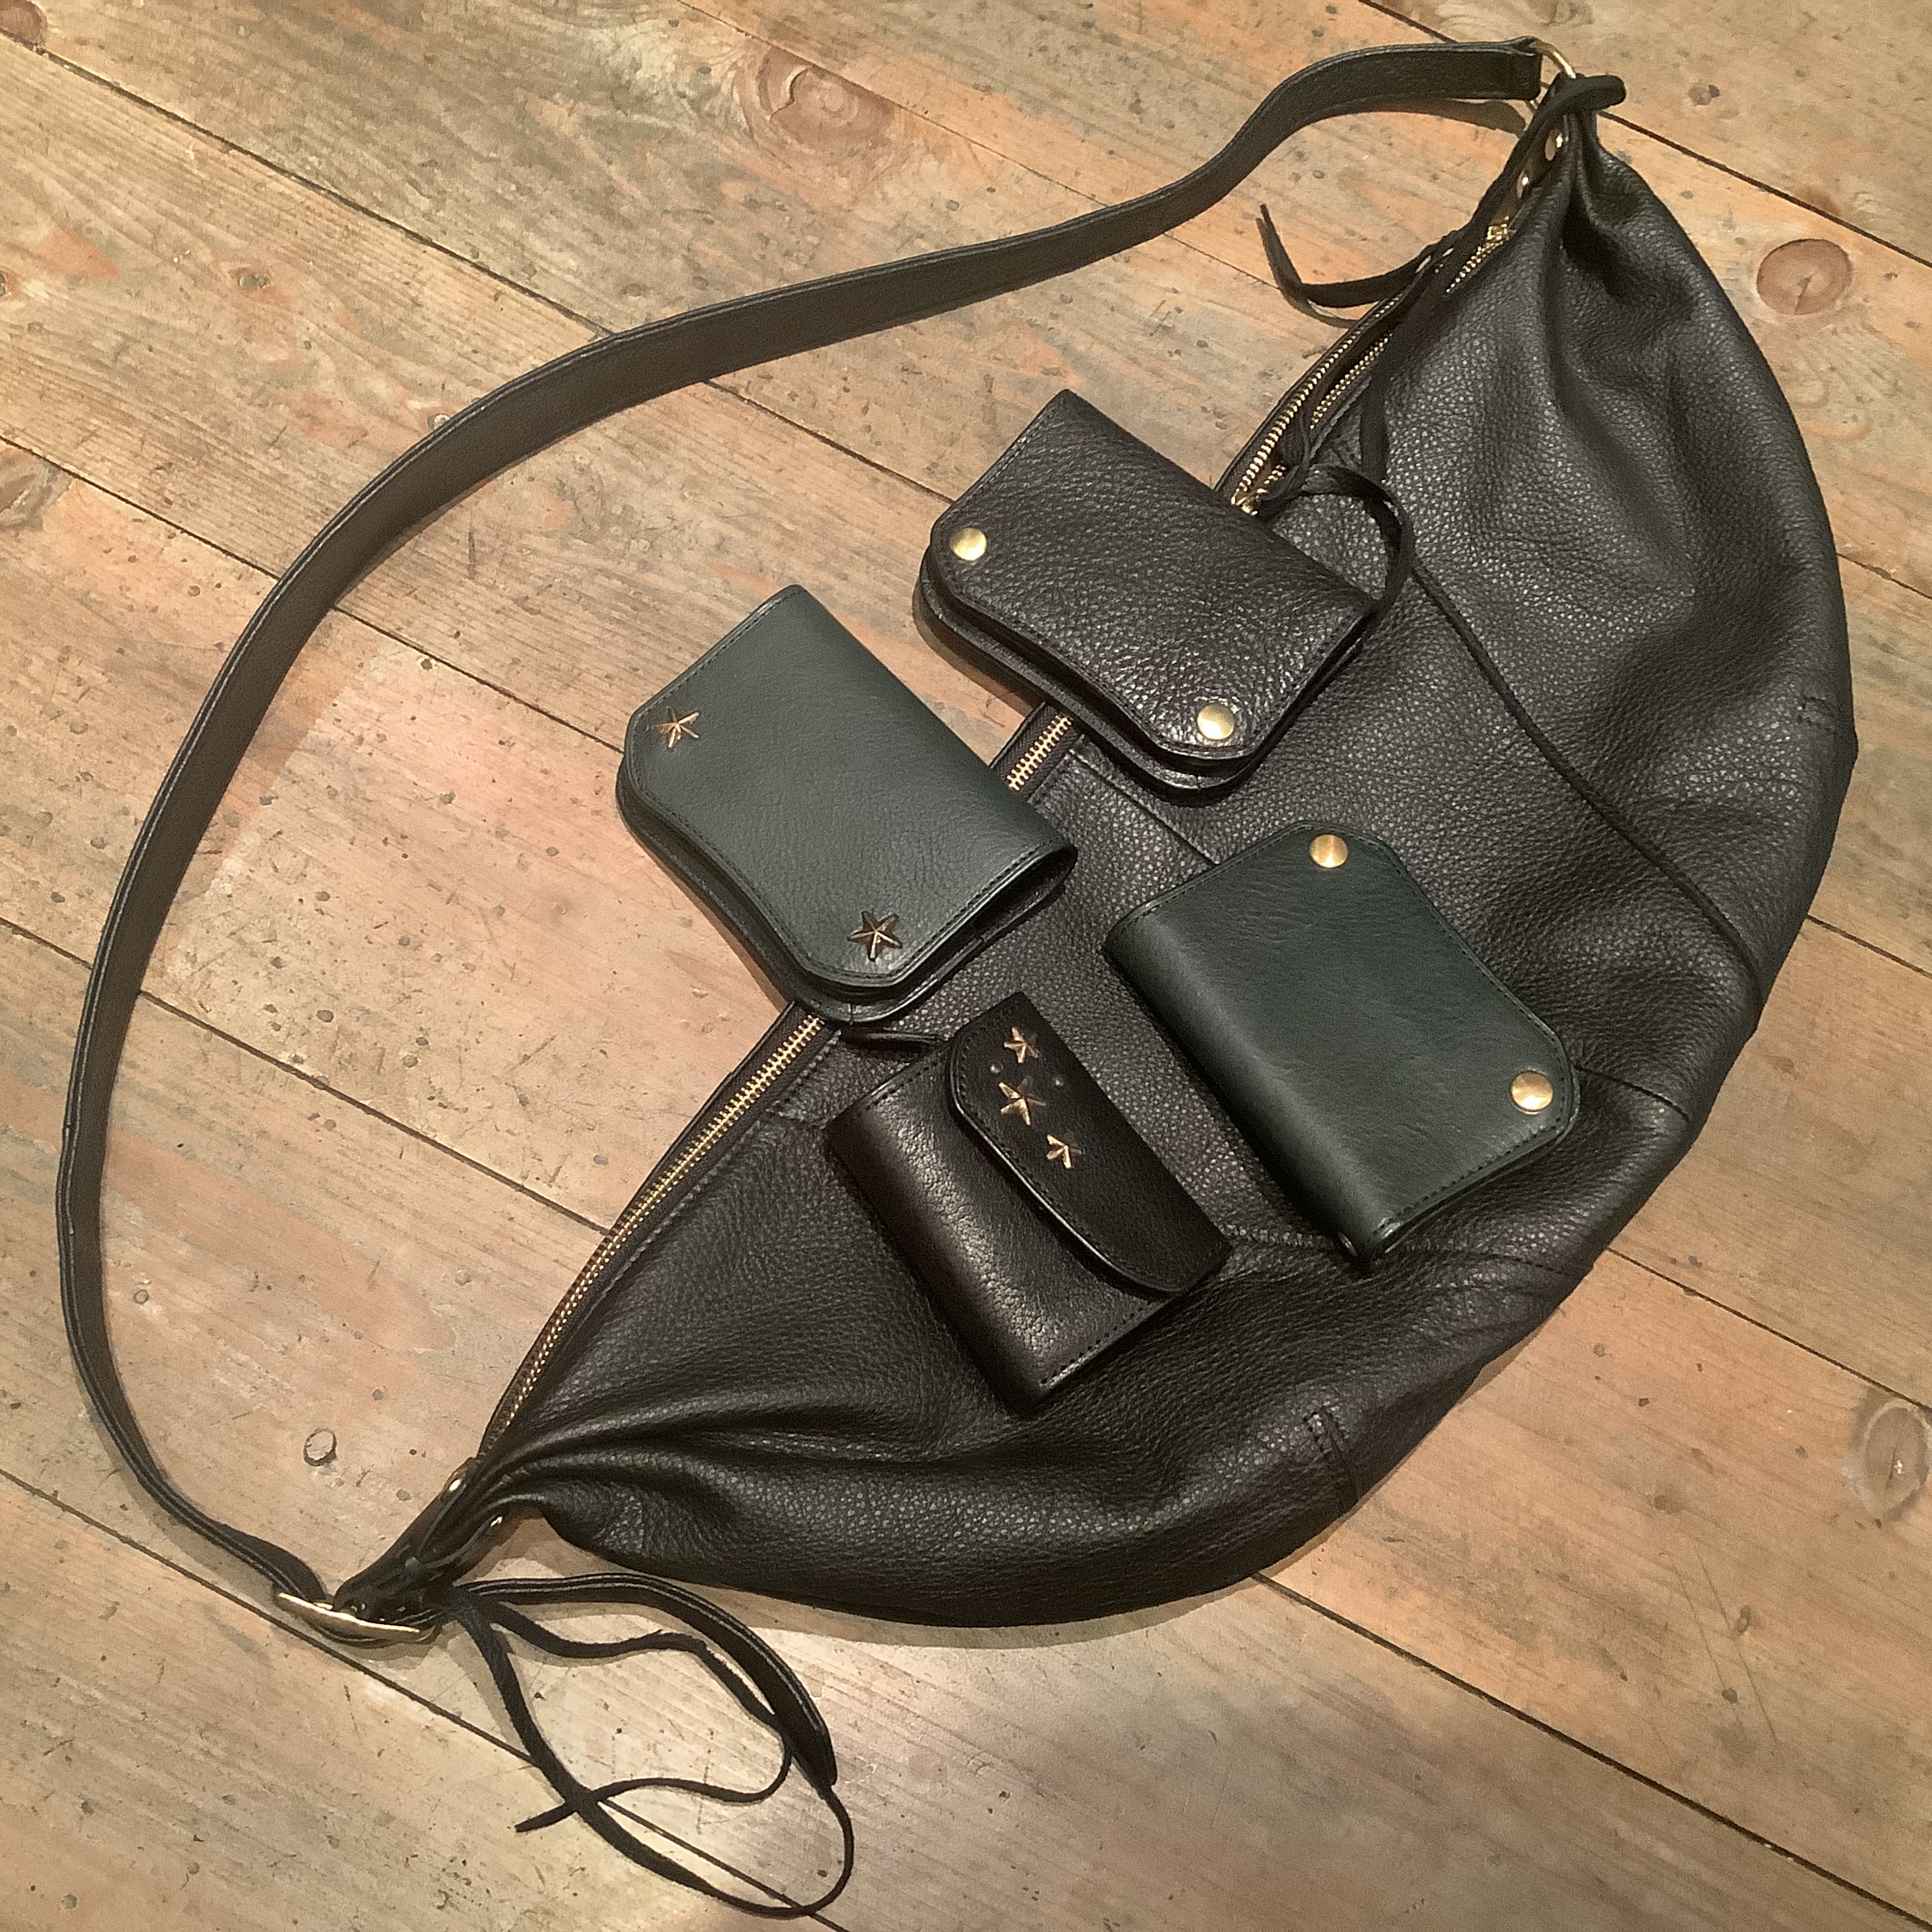 Groover Leather グルーバーレザー　DearSkinBag　ハーフムーンバッグ